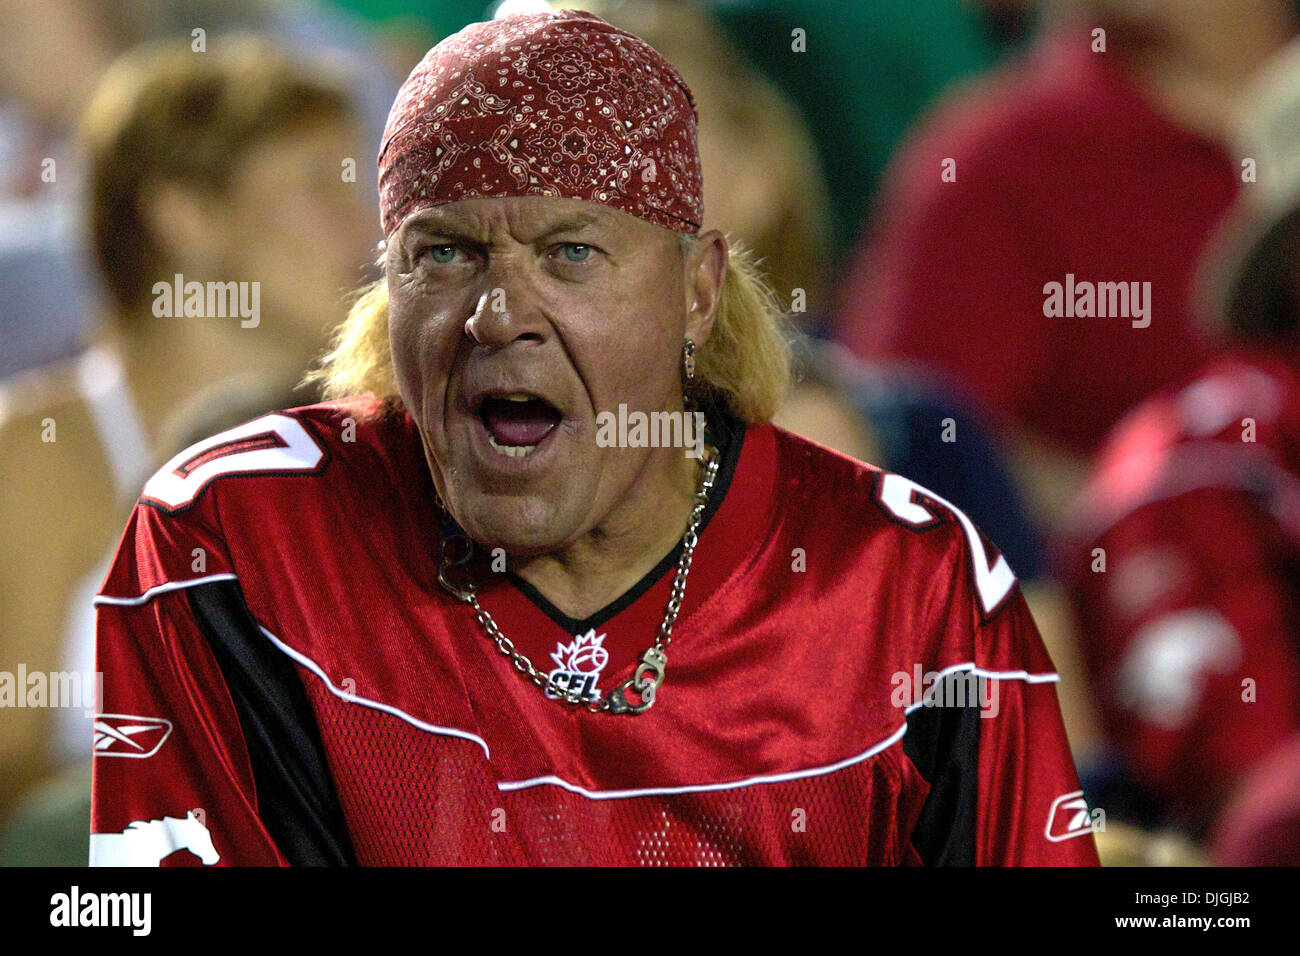 July 24, 2010 - Calgary, Alberta, Canada - 24 July 2010: A spirited Calgary Stampeders fan shouts during a game against the Saskatchewan Roughriders at McMahon Stadium in Calgary, Alberta.  The Calgary Stampeders defeated the Saskatchewan Roughriders 40 to 20..Mandatory Credit: Irena Thompson / Southcreek Global (Credit Image: Â© Southcreek Global/ZUMApress.com) Stock Photo